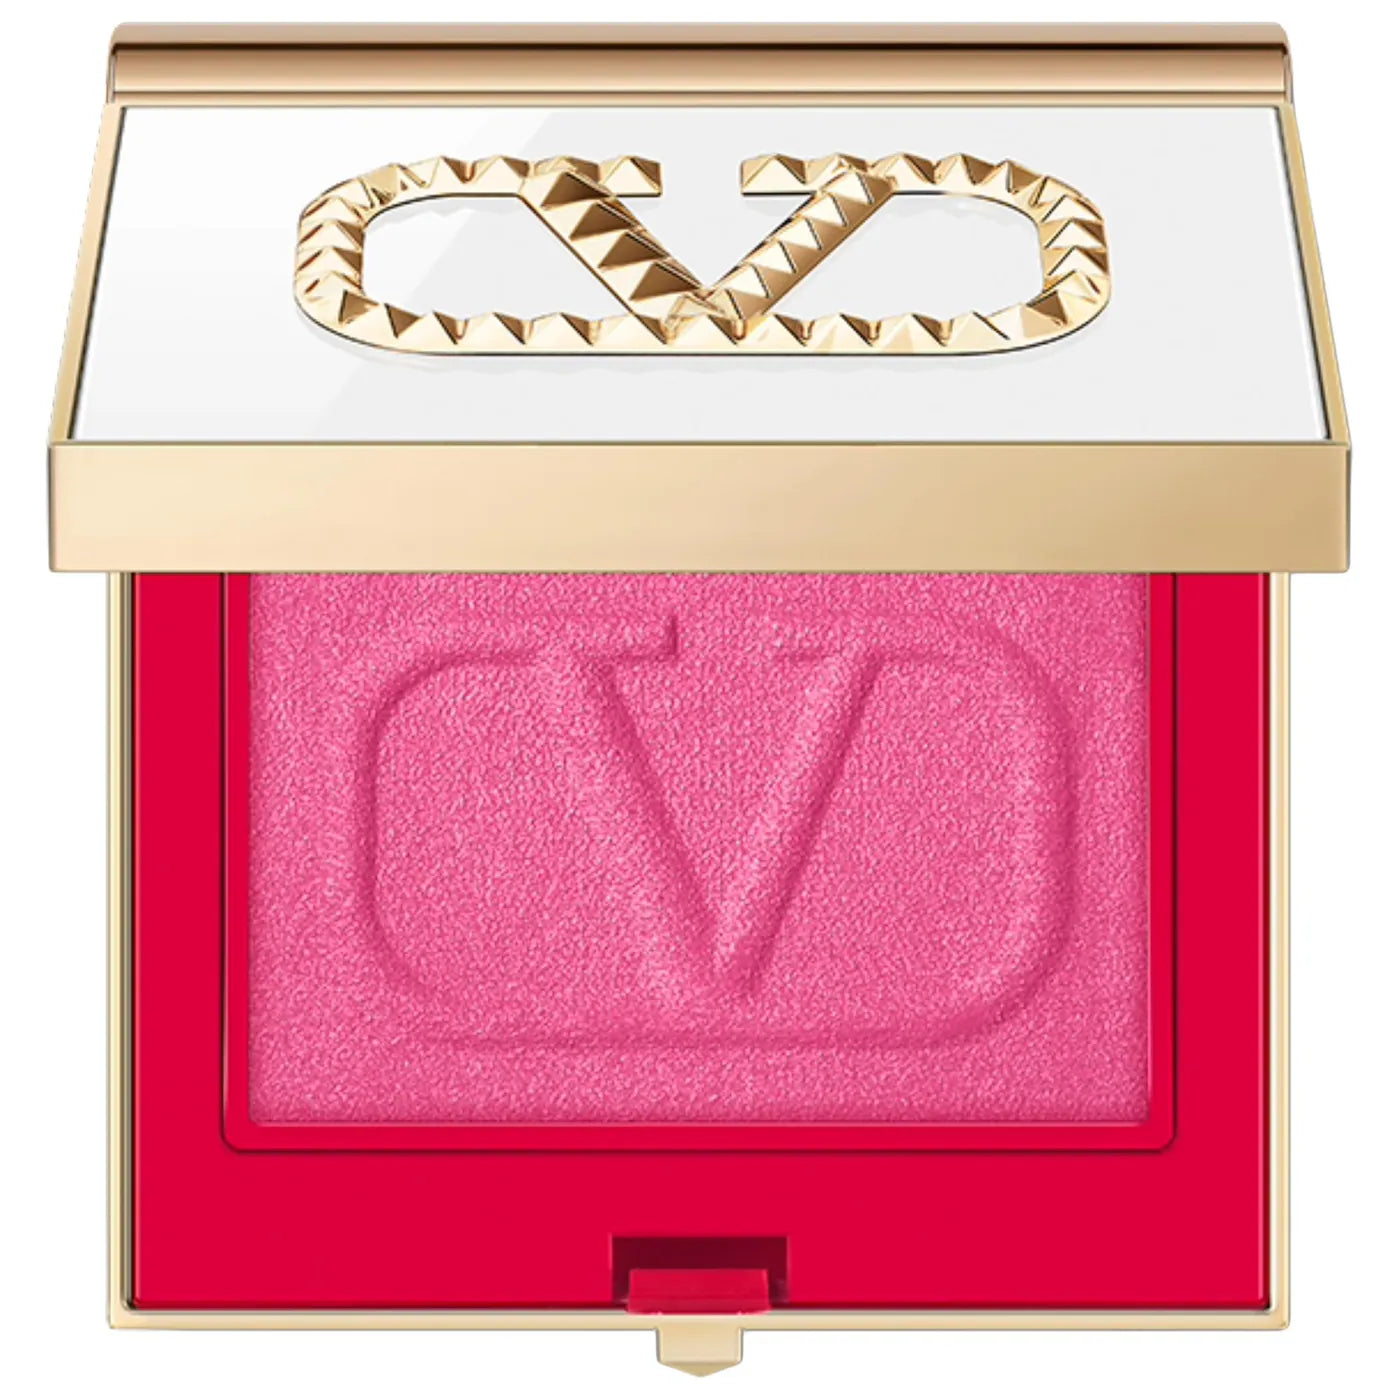 Valentino Beauty Holiday Eye2Cheek Eyeshadow and Blush in Pink is Punk